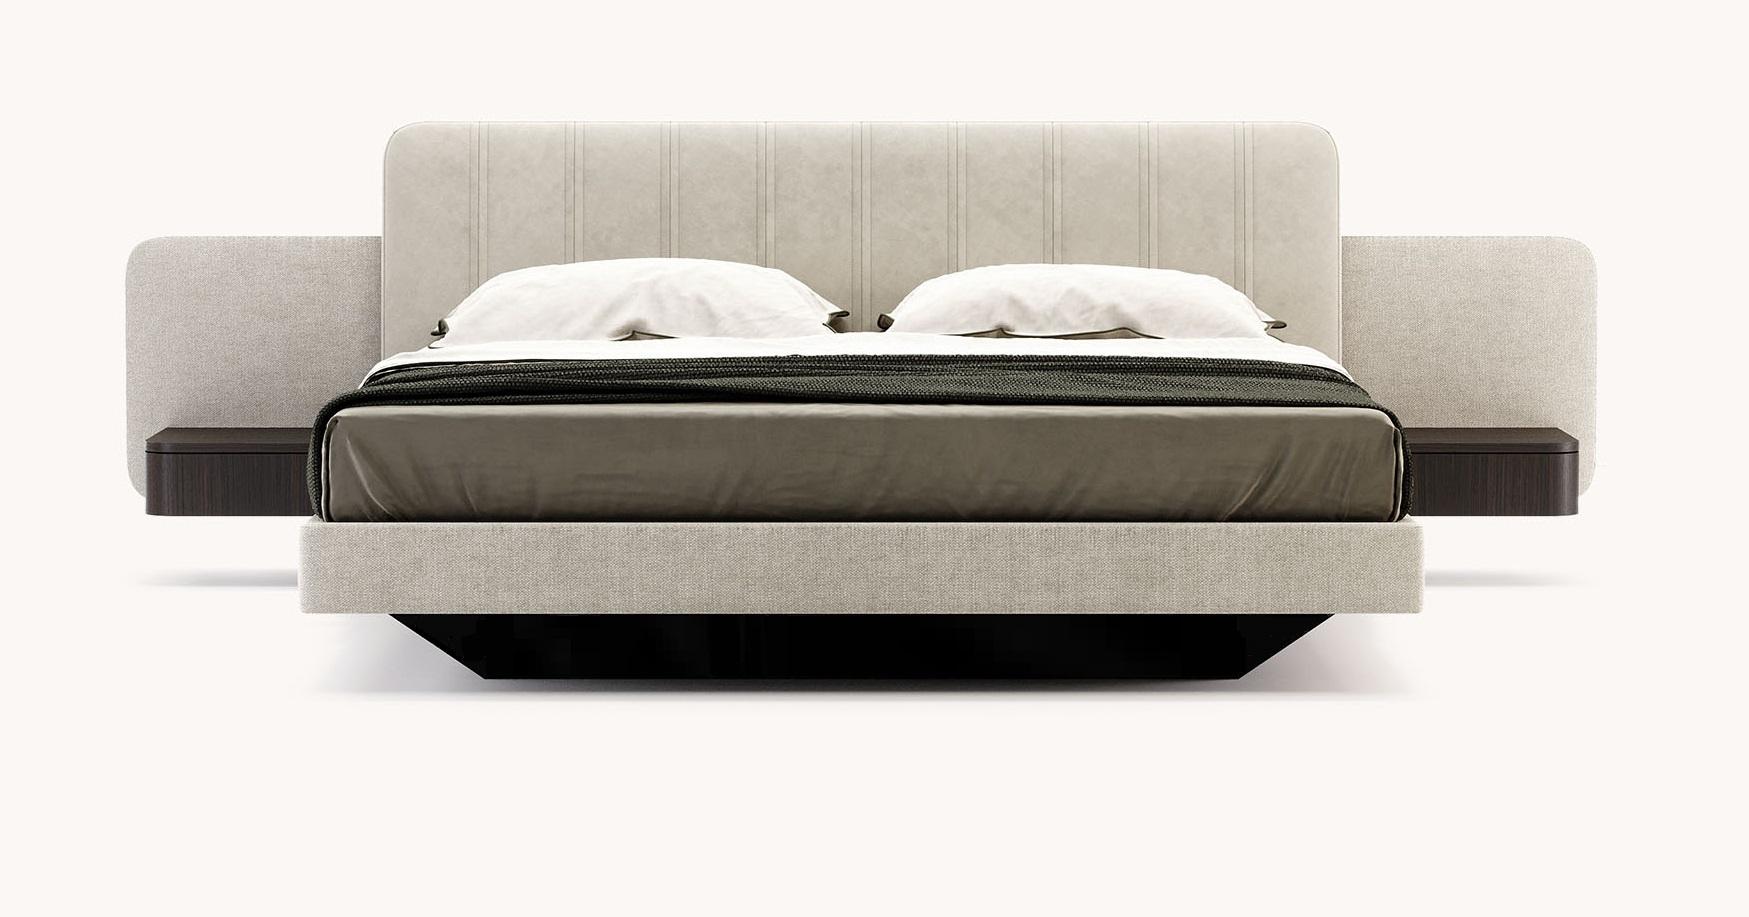 american king size bed dimensions